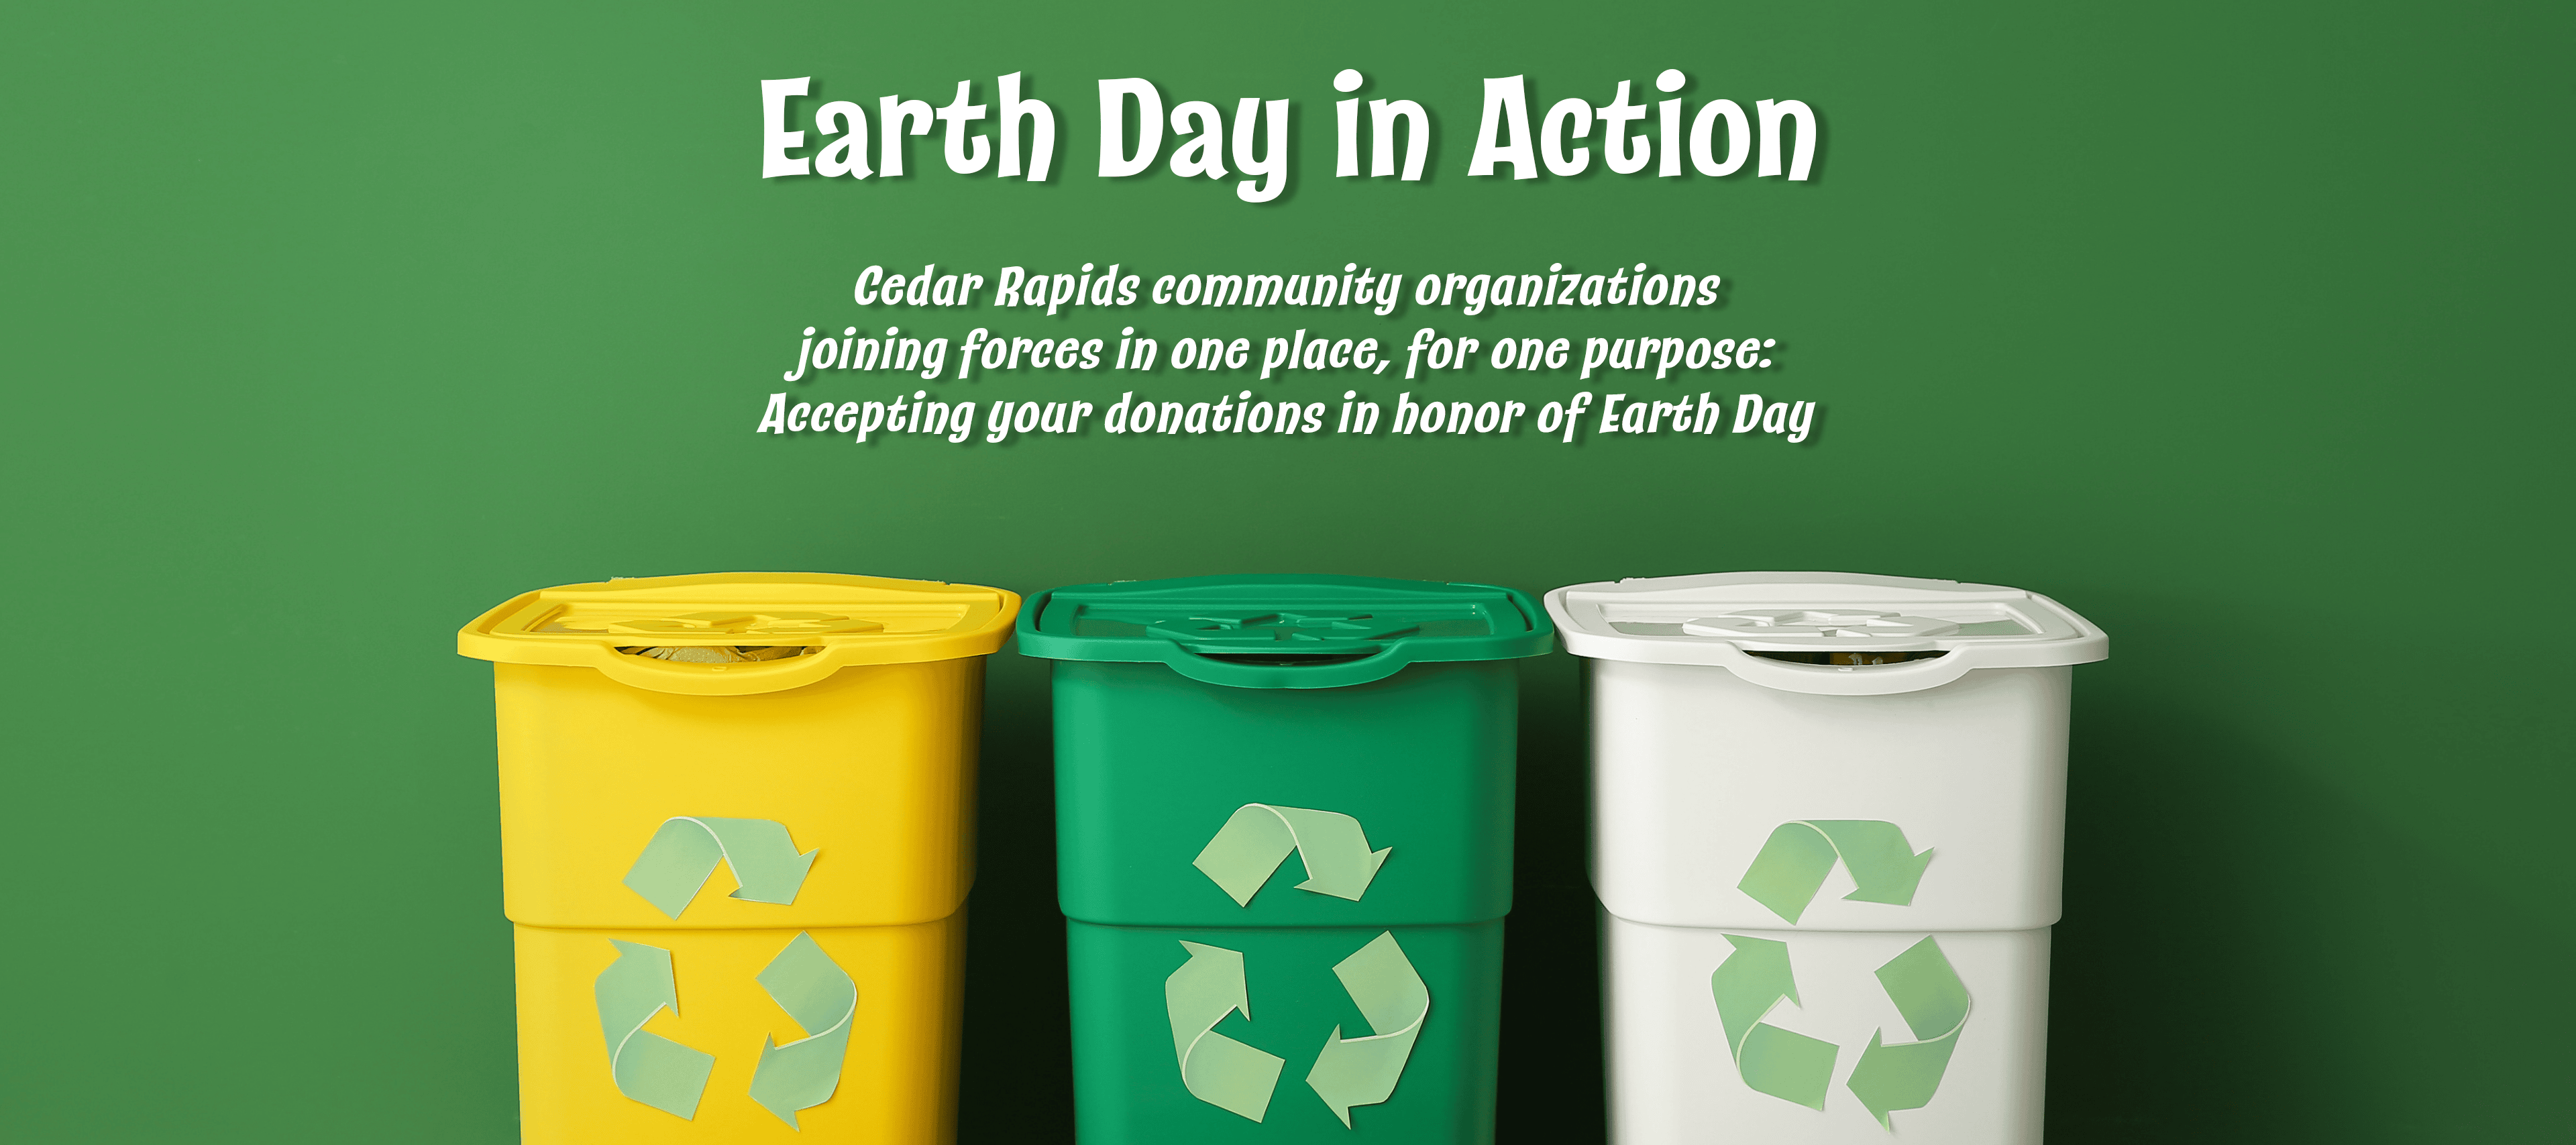 Earth Day in Action Event